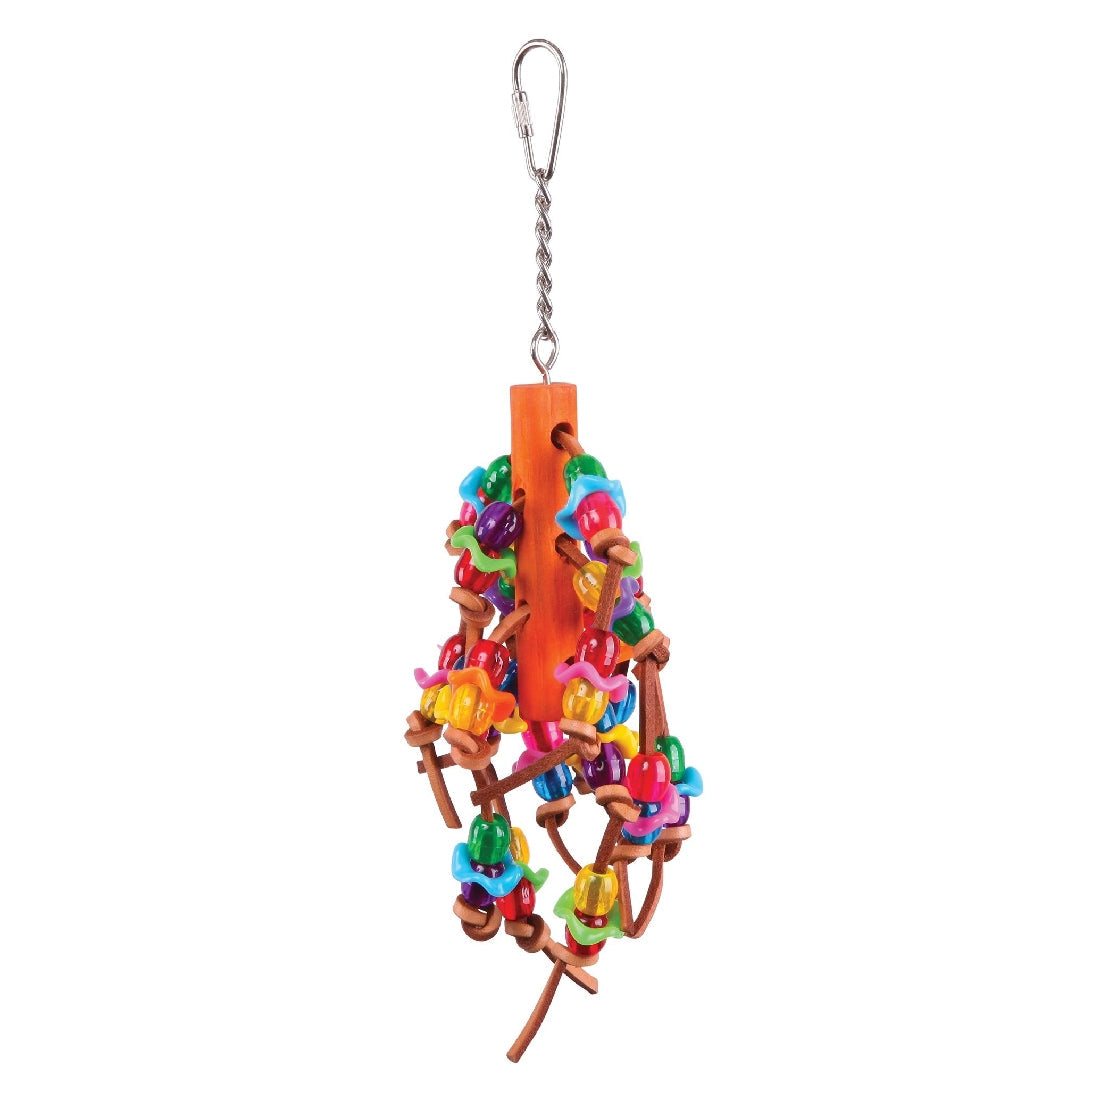 Colorful hanging bird toy with wooden beads and leather strips.